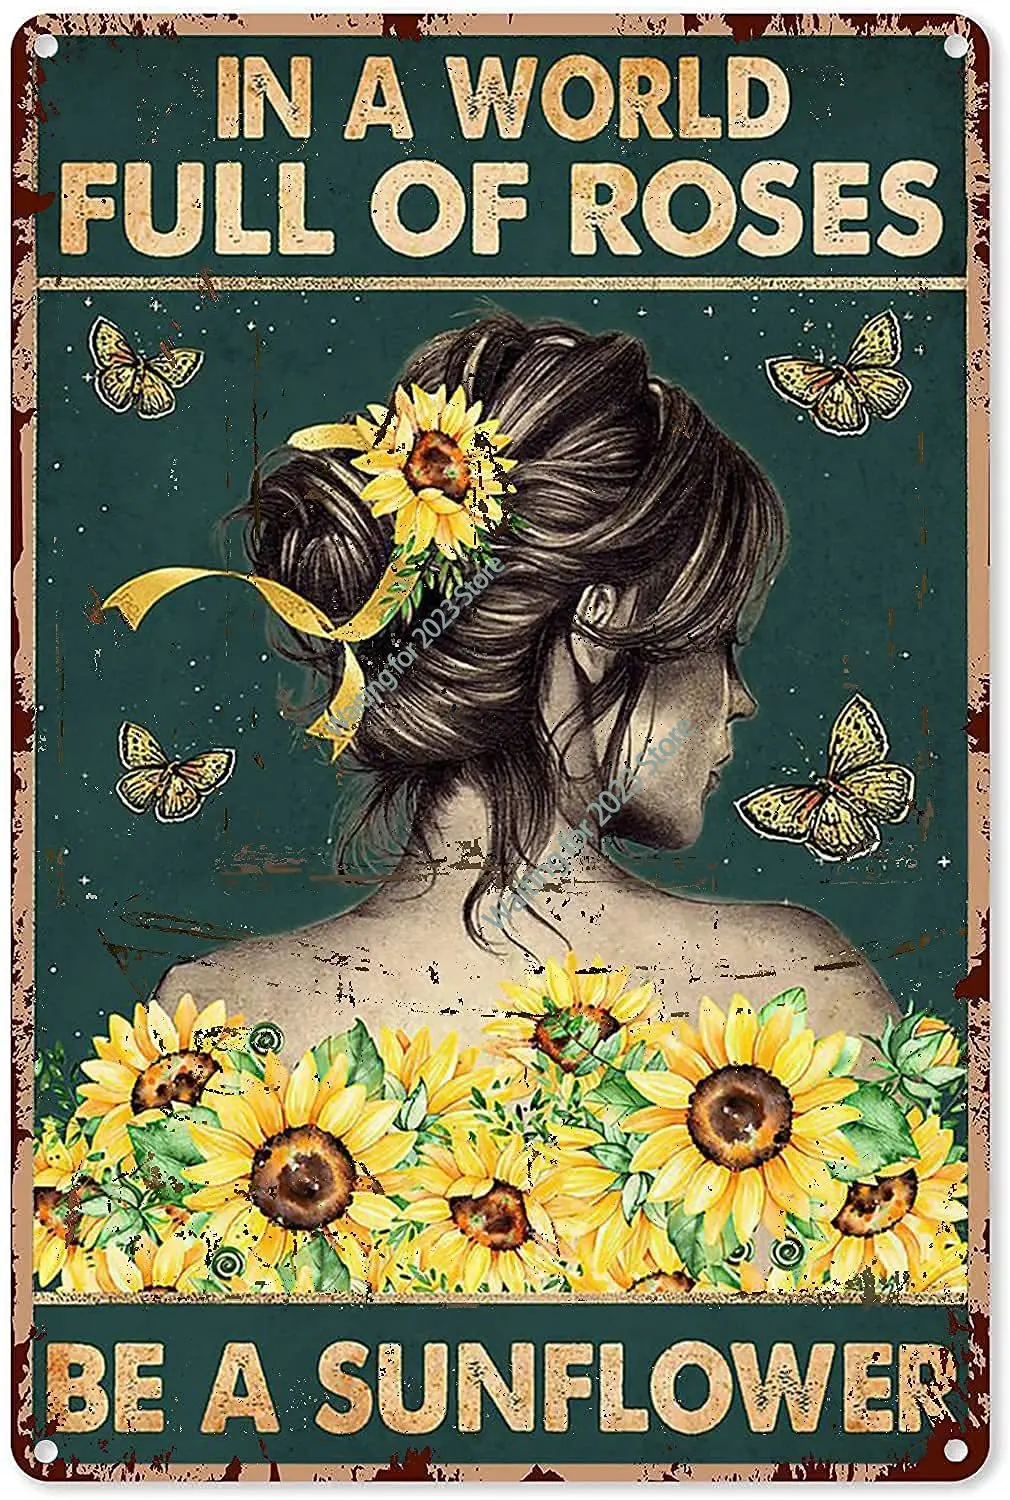 

Vintage Metal Tin Sign Hippie Girl and Butterflies Sunflower Decor in A World Full of Roses Be A Sunflower Iron Painting for Hom